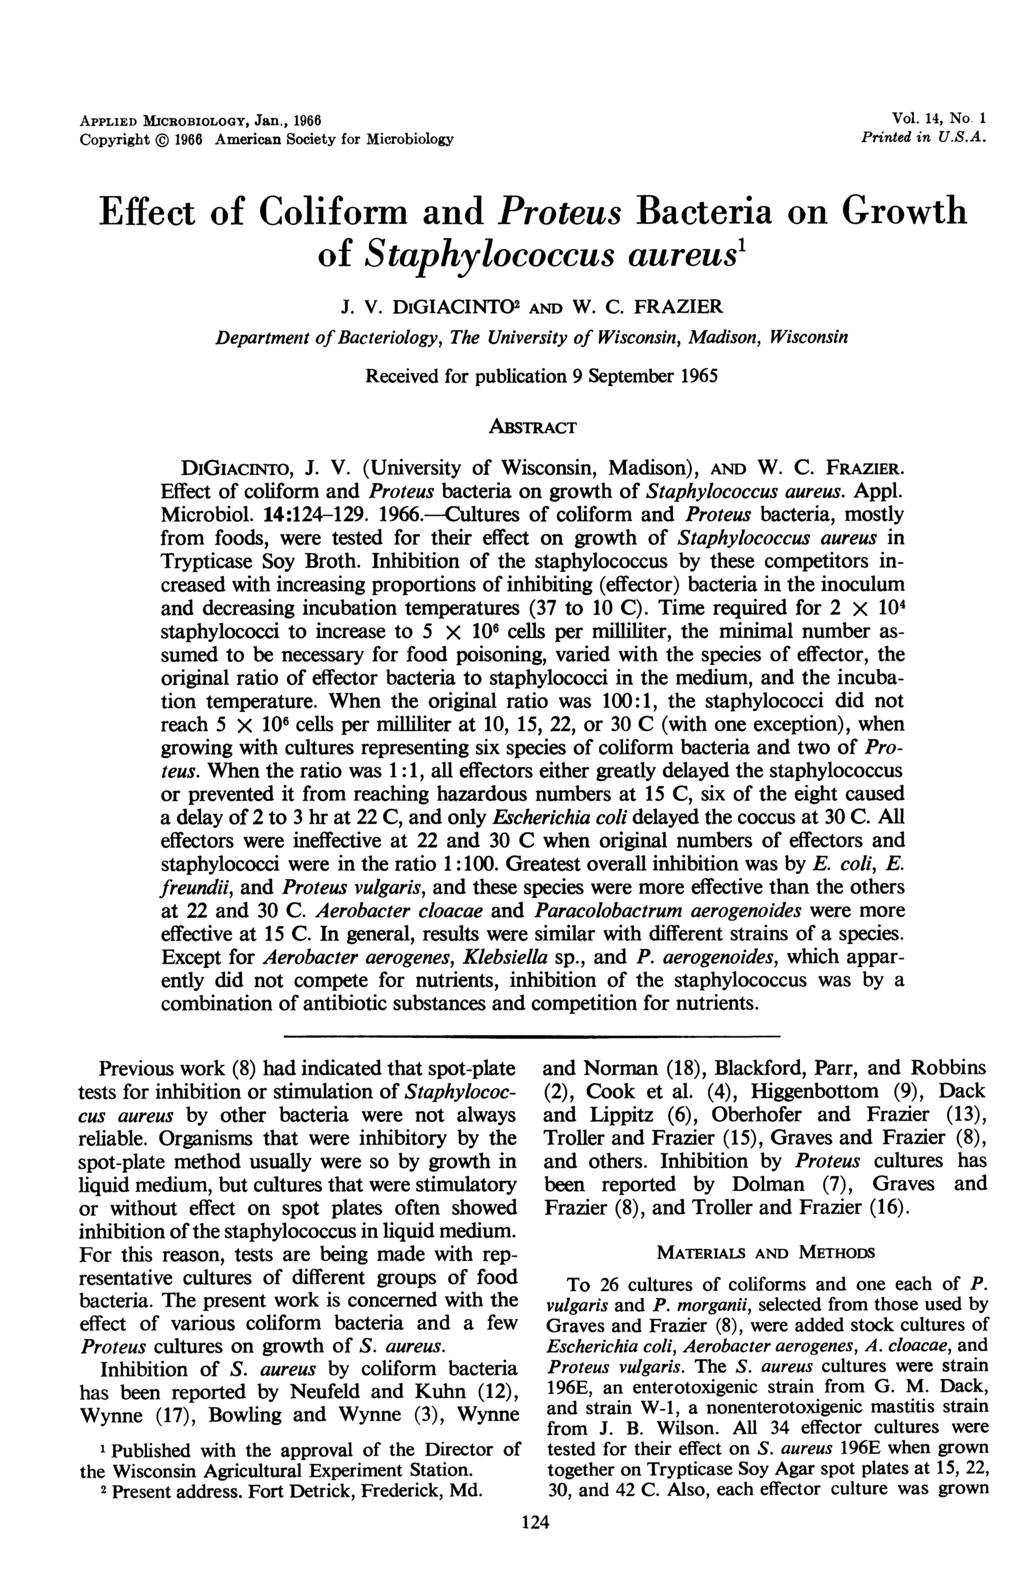 APPLIED MICROBIOLOGY, Jan., 19 Copyright @ 19 American Society for Microbiology Vol. 14, No. 1 Printed in U.S.A. Effect of Coliform and Proteus Bacteria on Growth of Staphylococcus aureus1 J. V. DiGIACINTO2 AND W.